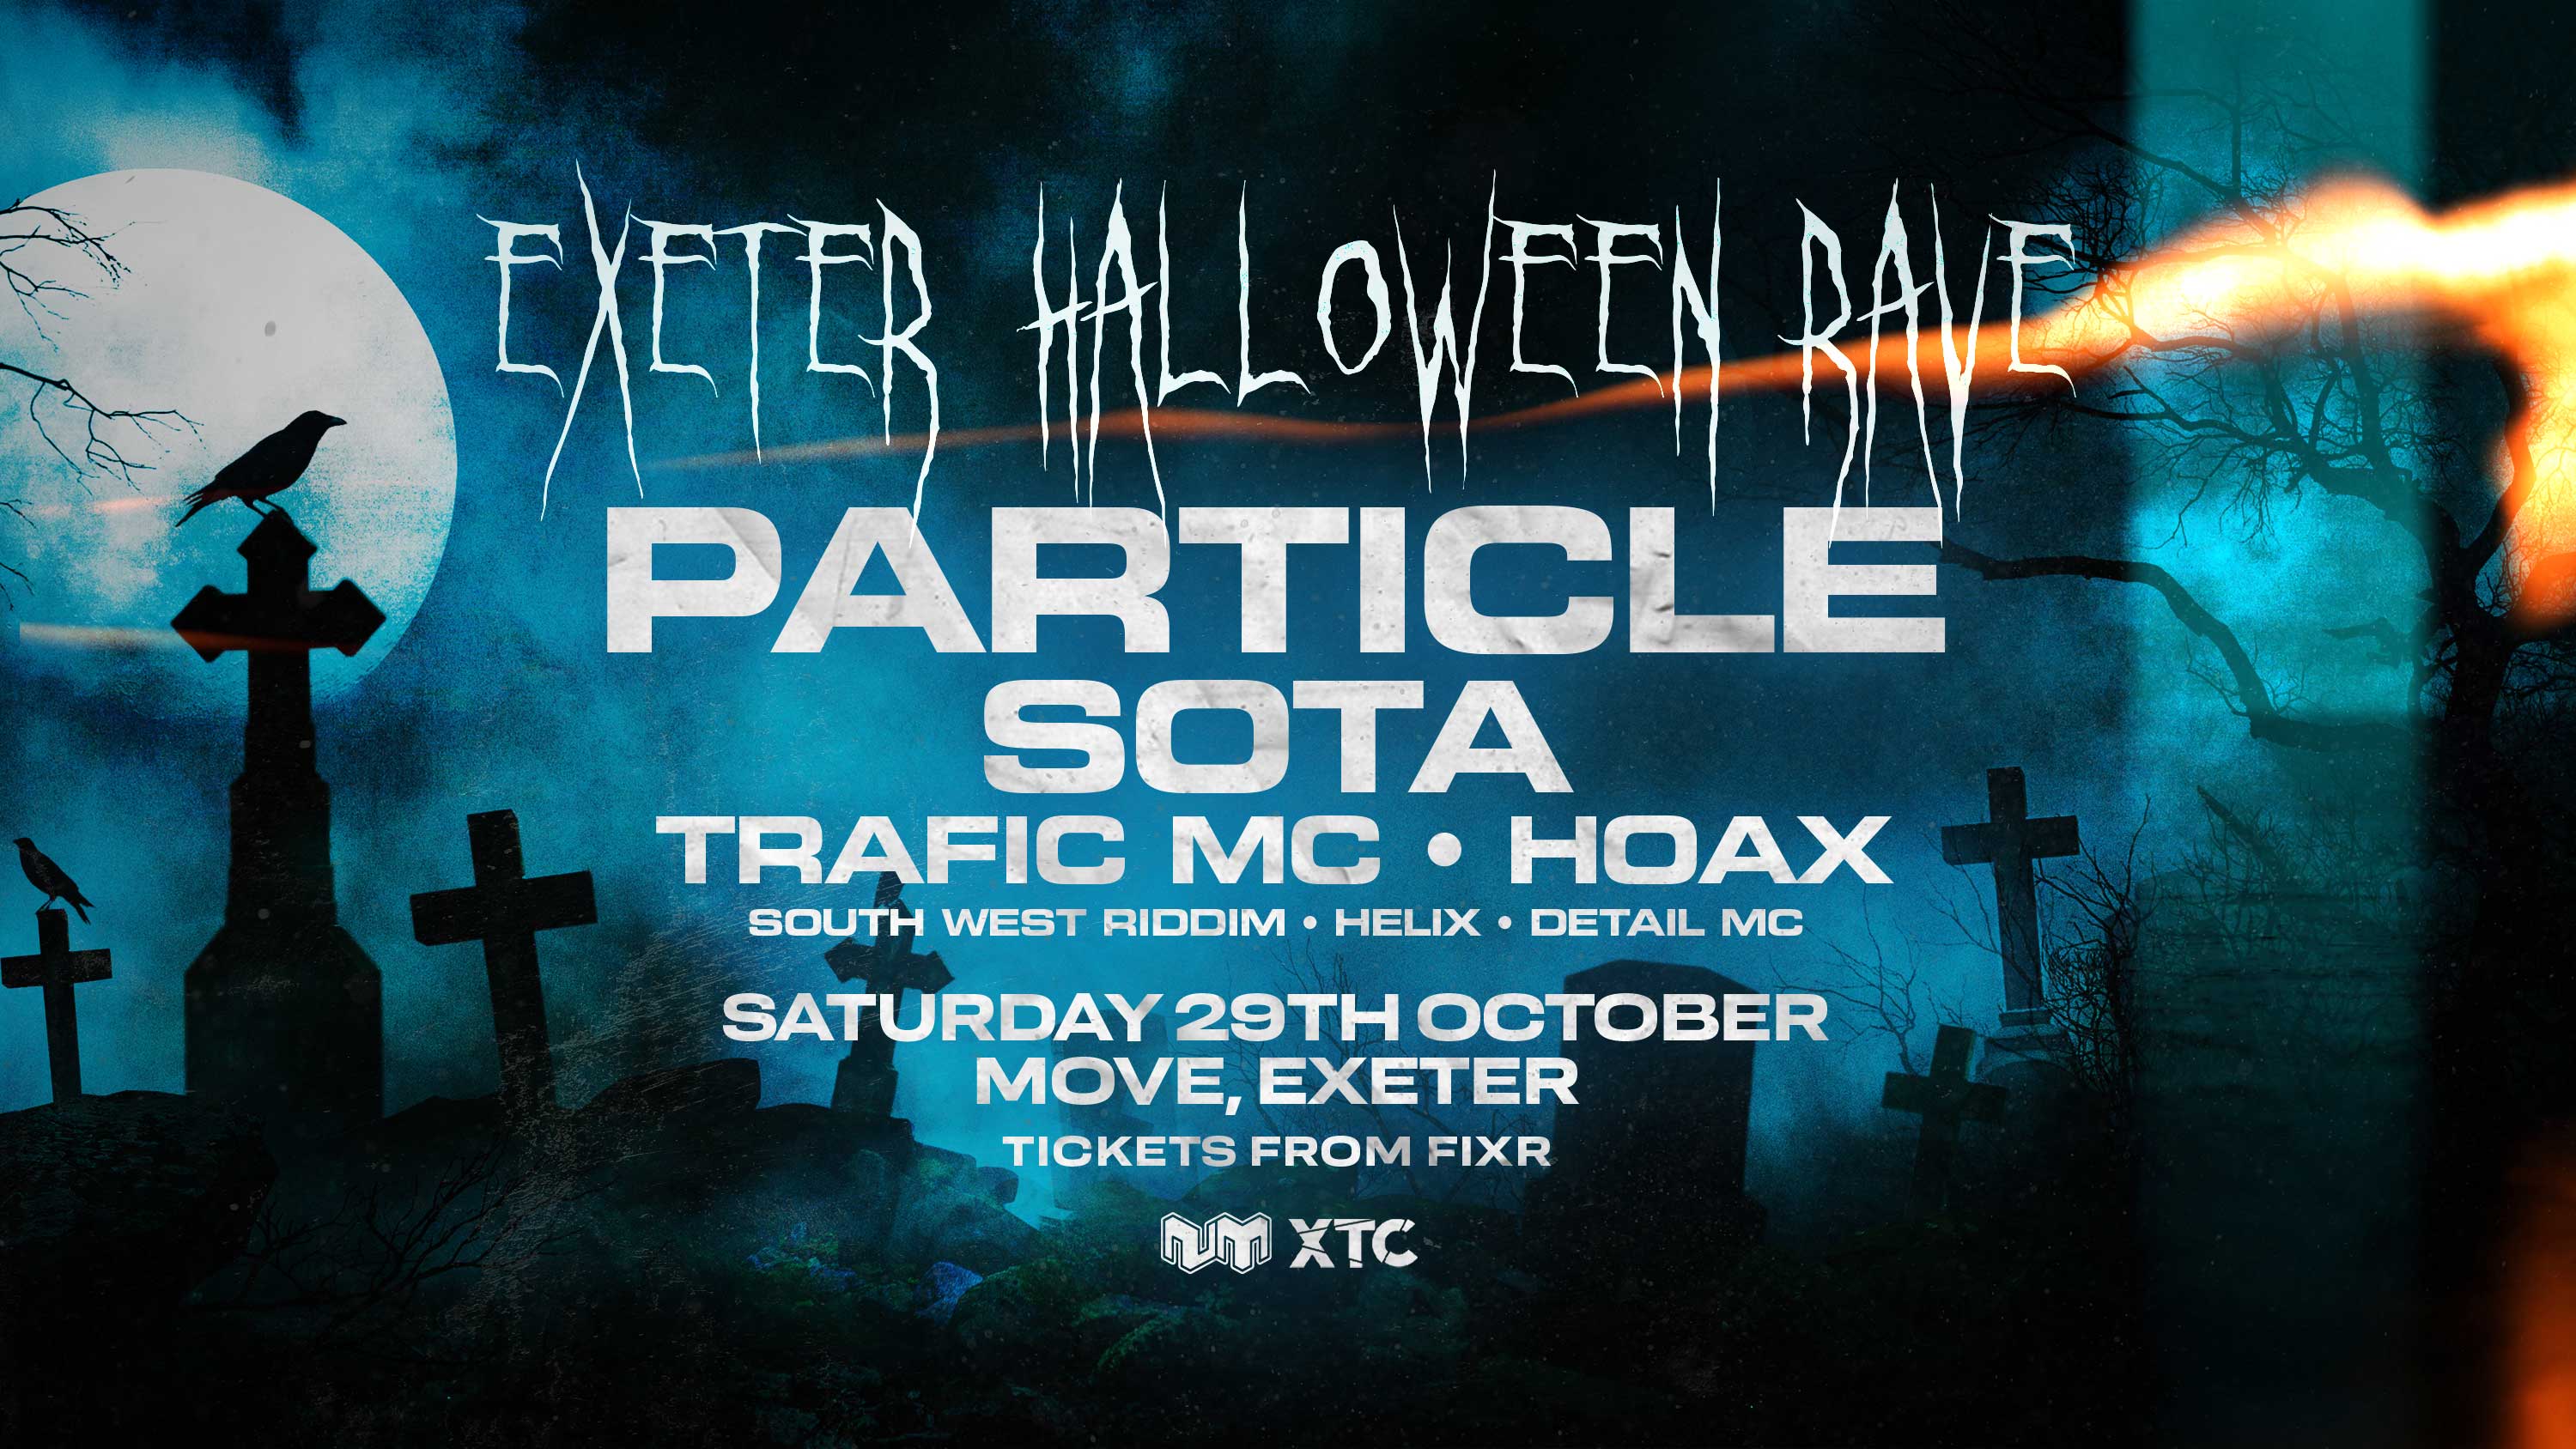 Exeter Halloween Rave: Particle, Sota, Trafic MC, Hoax